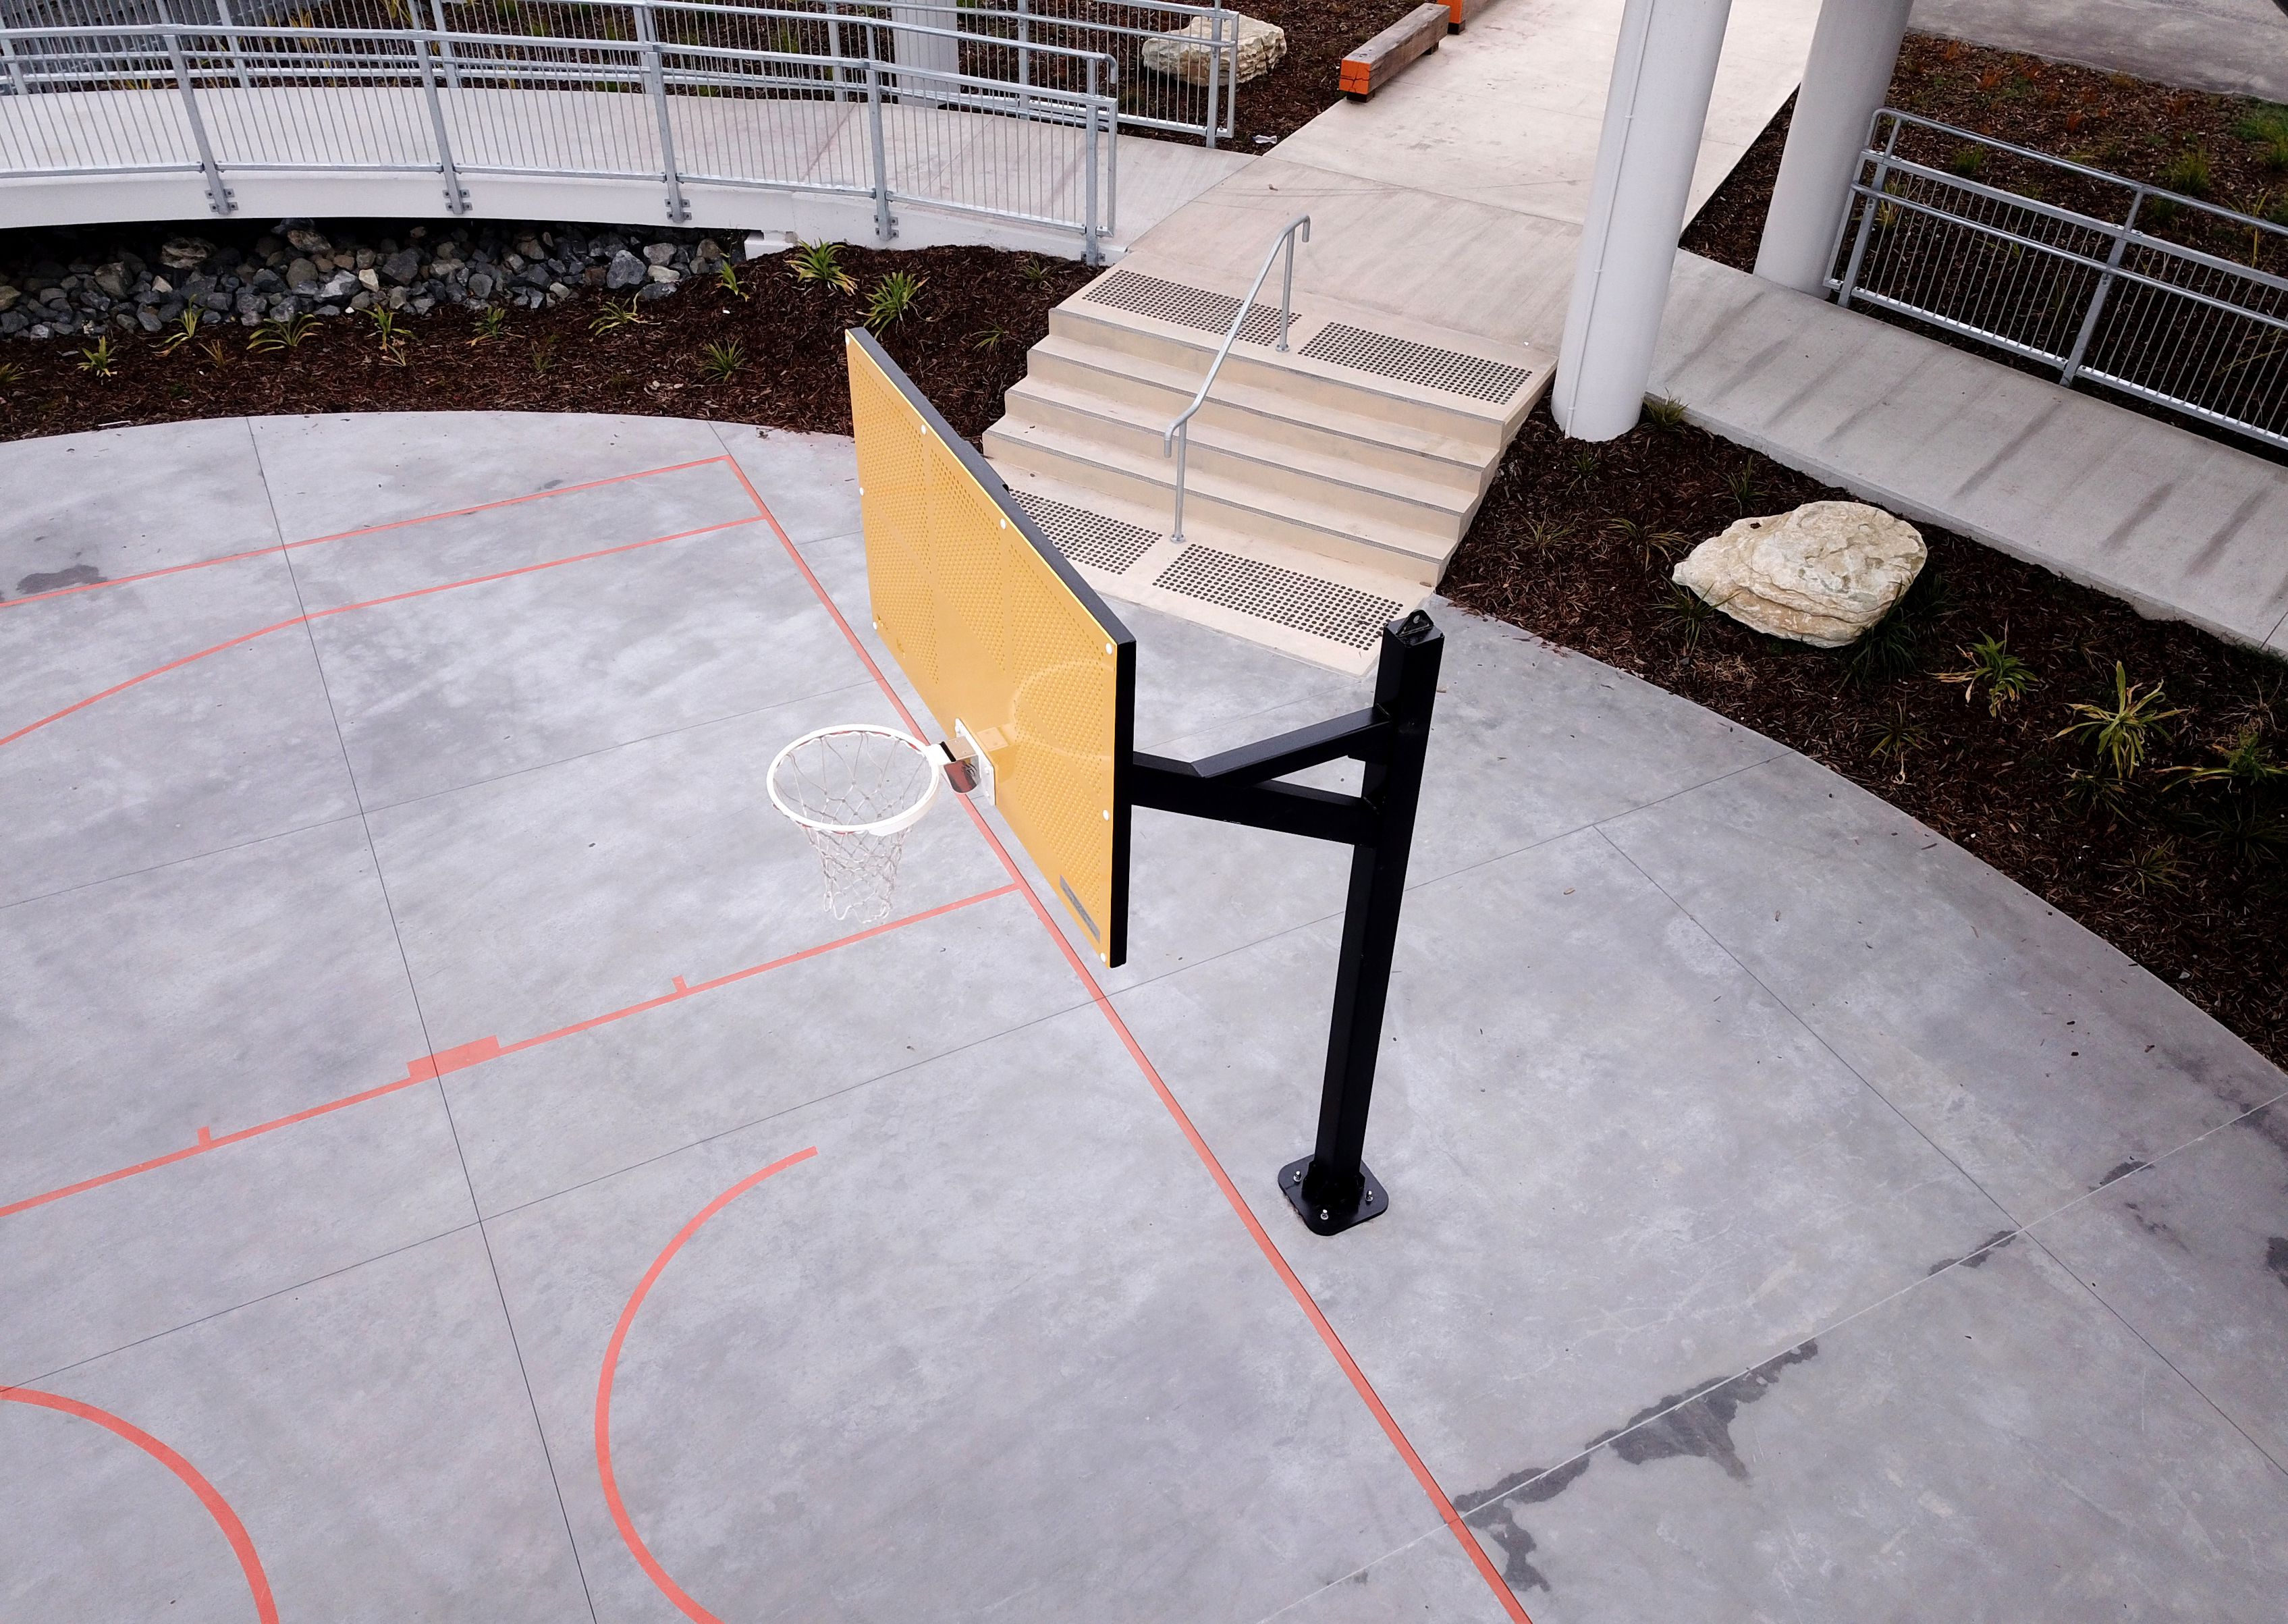 Basketball Grizzly Hoop